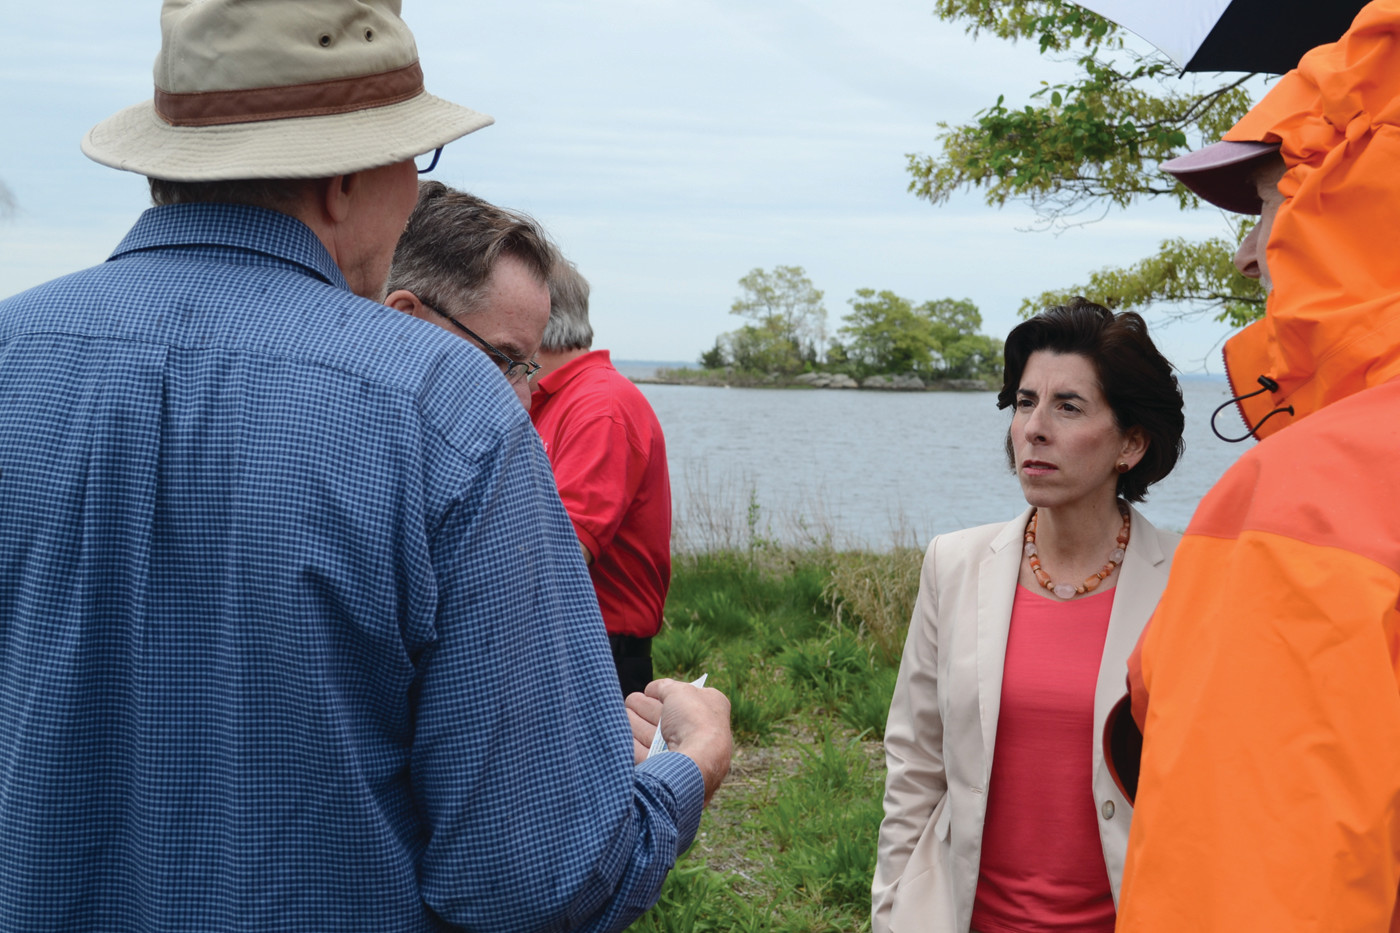 OUT OF THE OFFICE: Governor Raimondo was pleased to get out of the office and see Salter Grove, saying she thought it was important to see the places that will be improved by DEM grants.